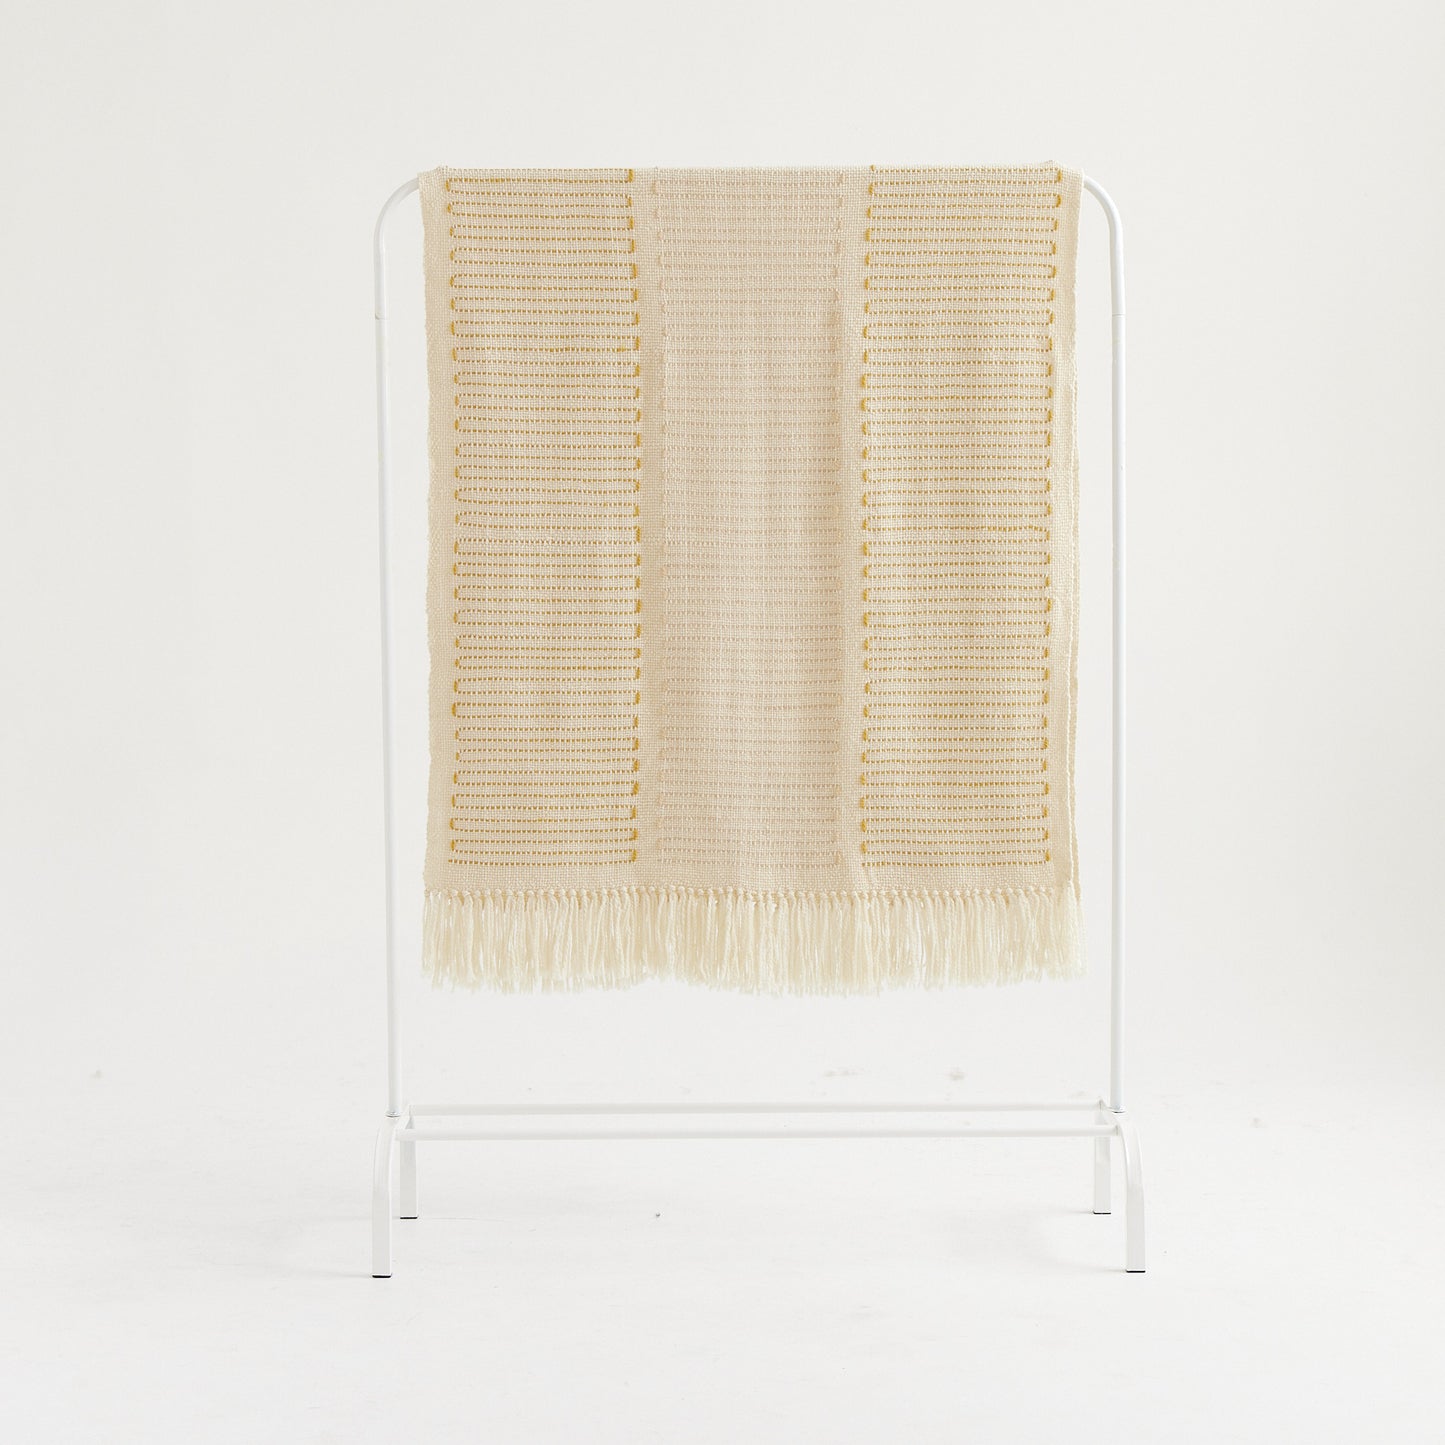 Embroidered Blanket Hand Woven with Detailed Artisanal Design Iris